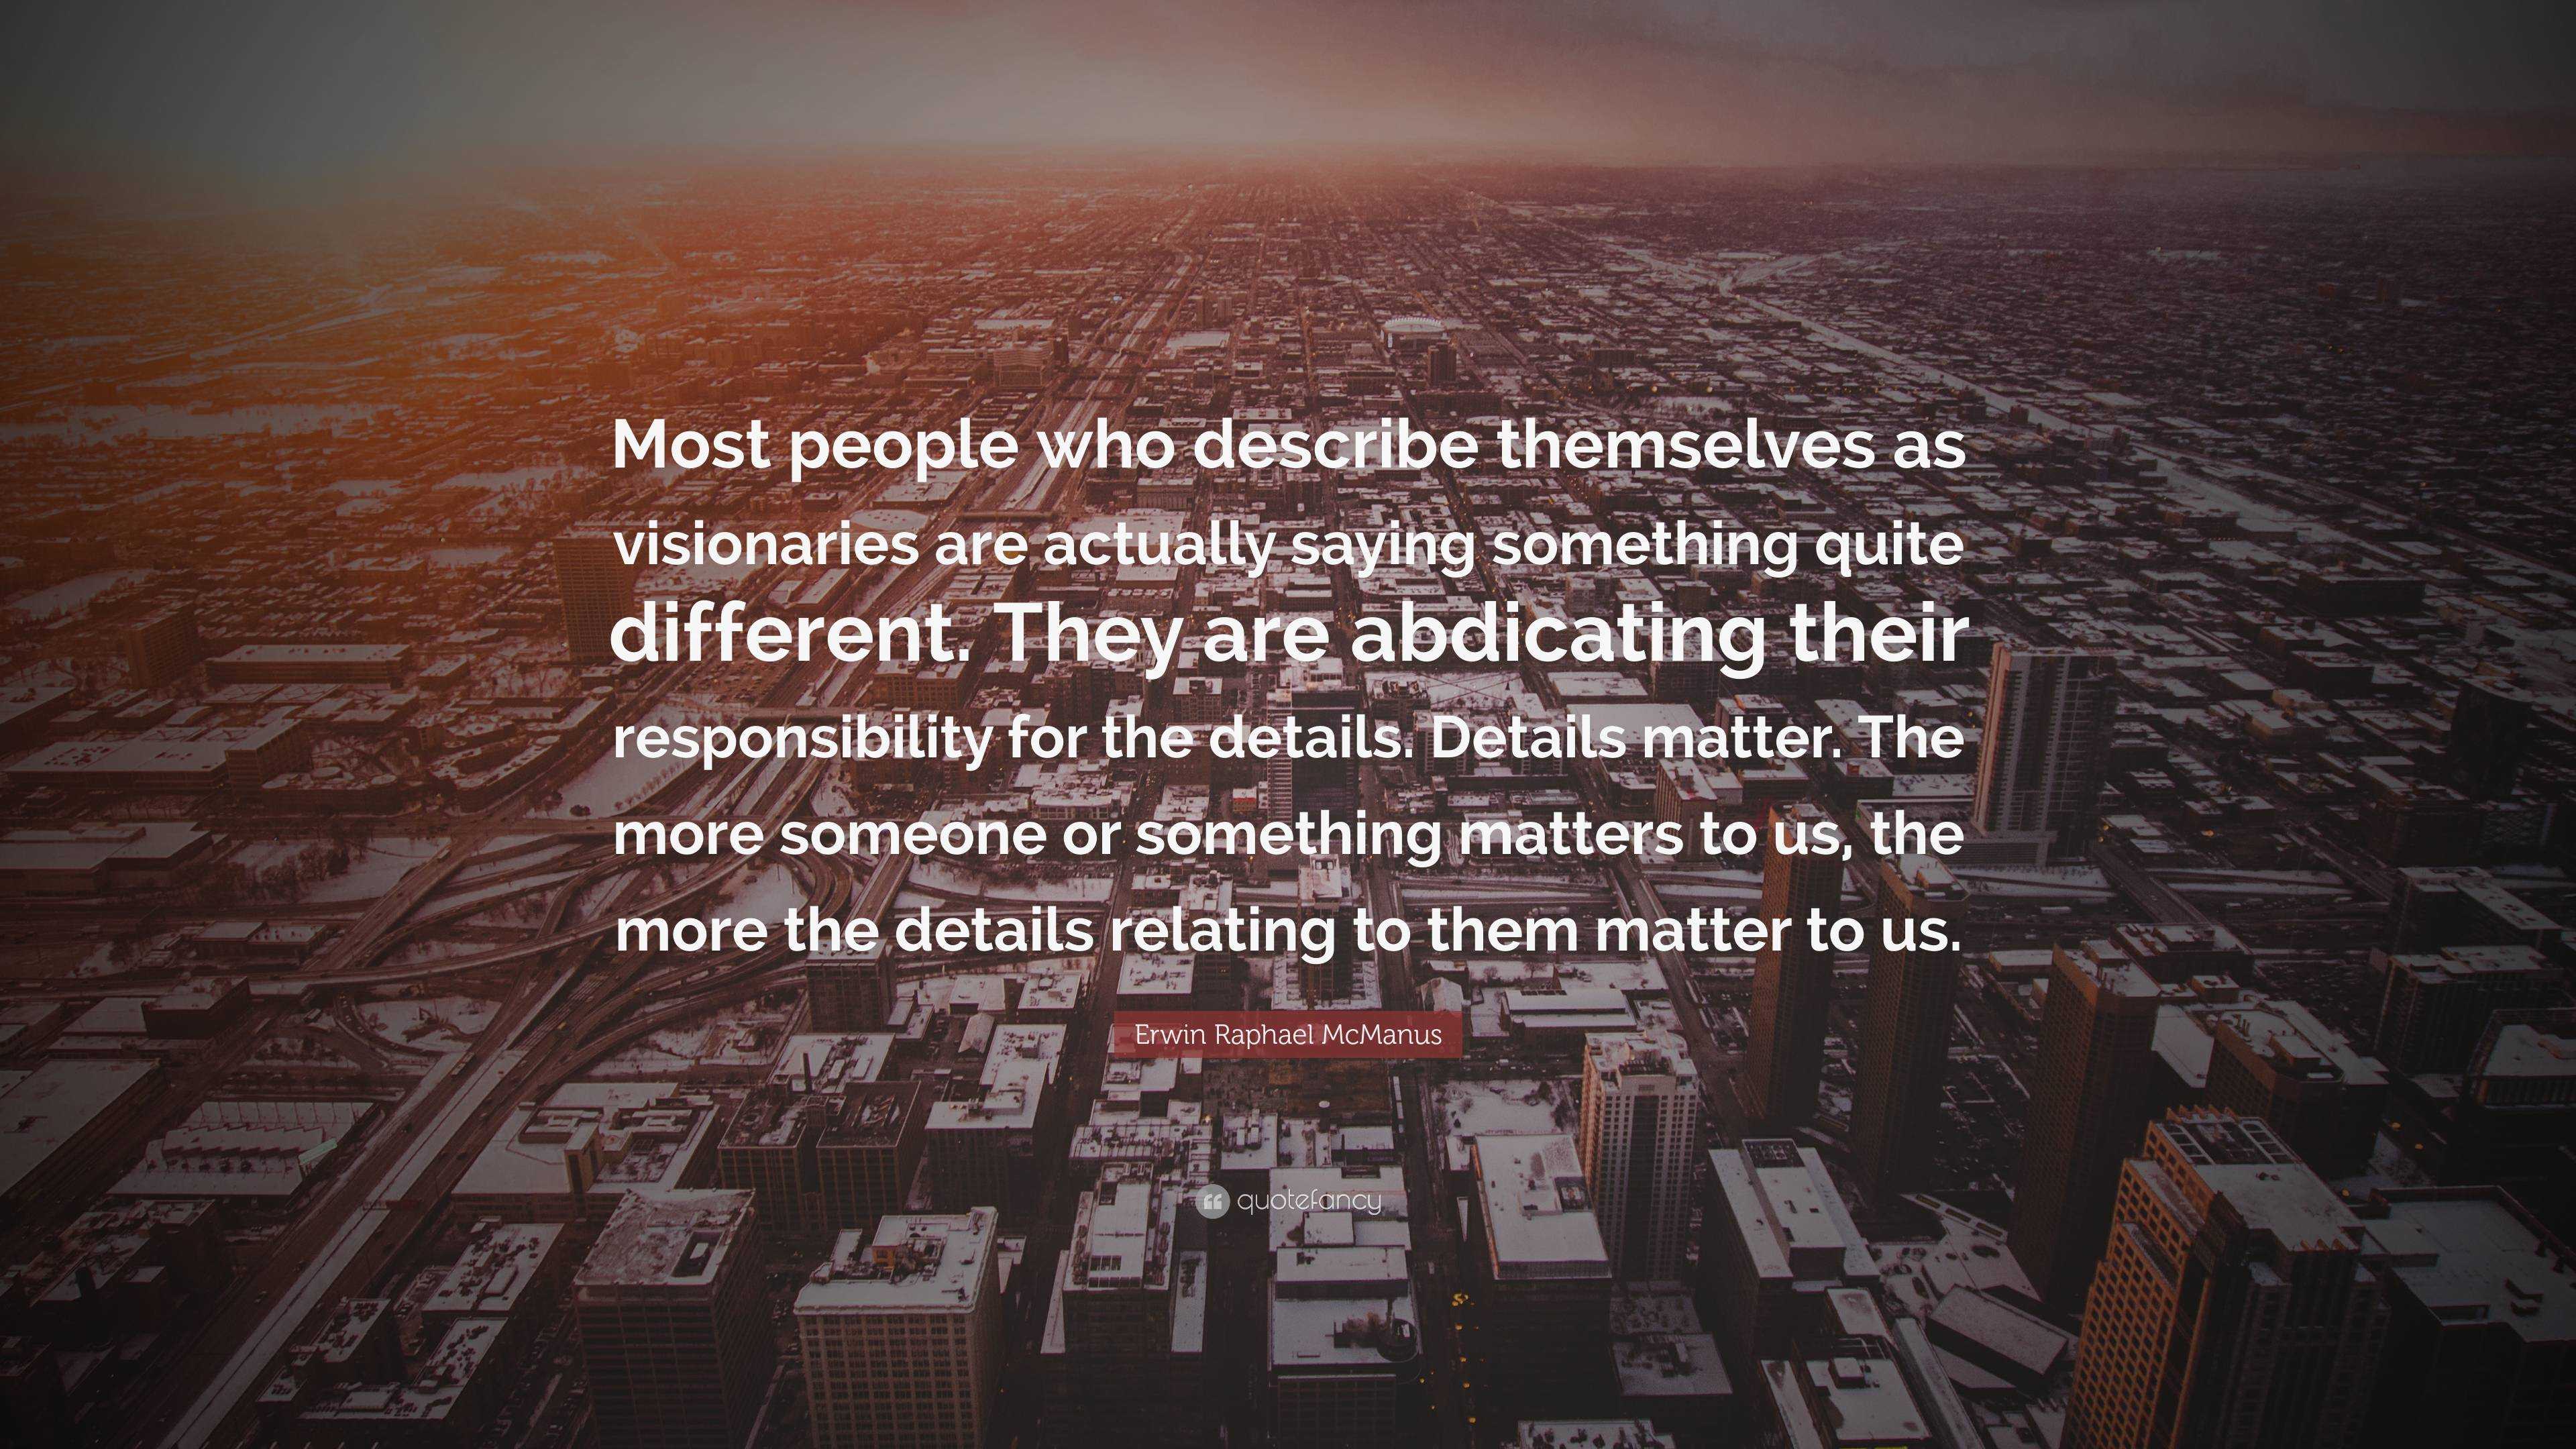 Erwin Raphael McManus Quote: “Most people who describe themselves as ...